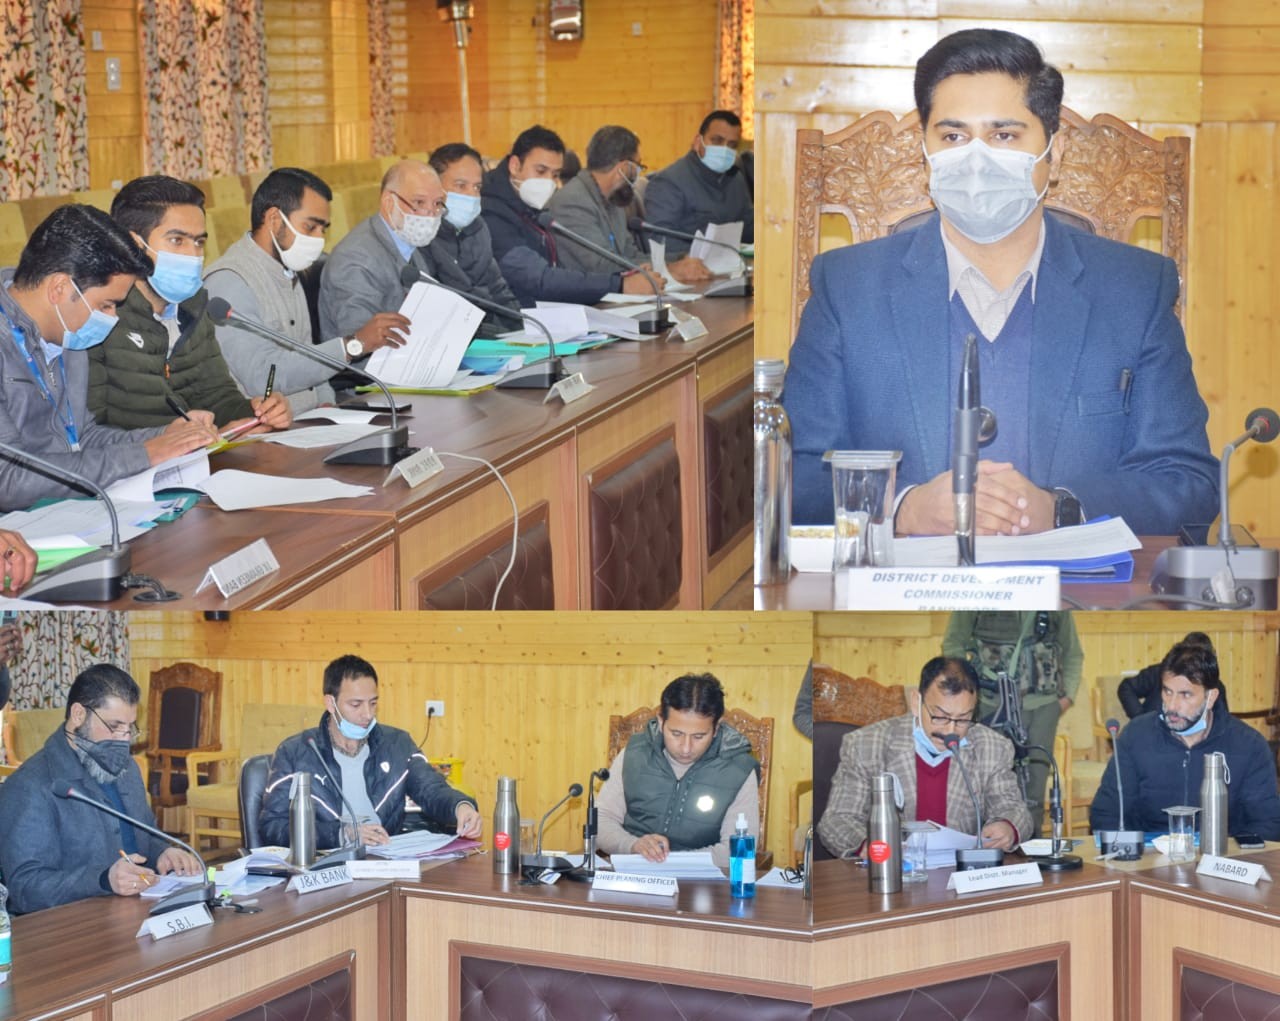  Cover all uncovered areas in Banking Sector of district: DC Bandipora